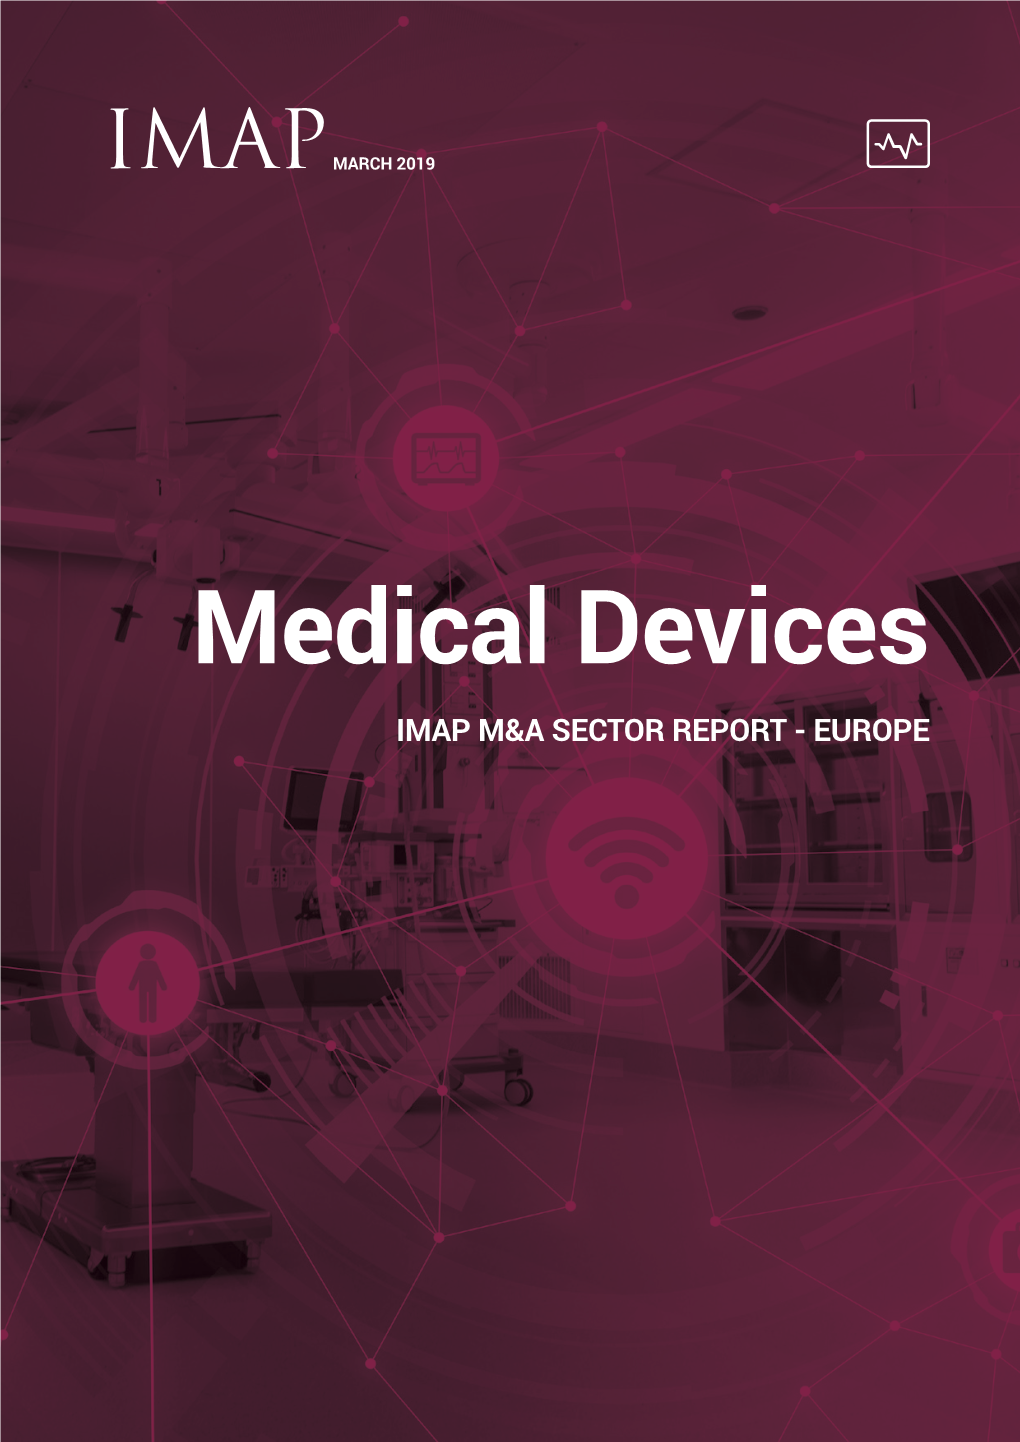 Europe 2019 Medical Devices M&A Sector Report